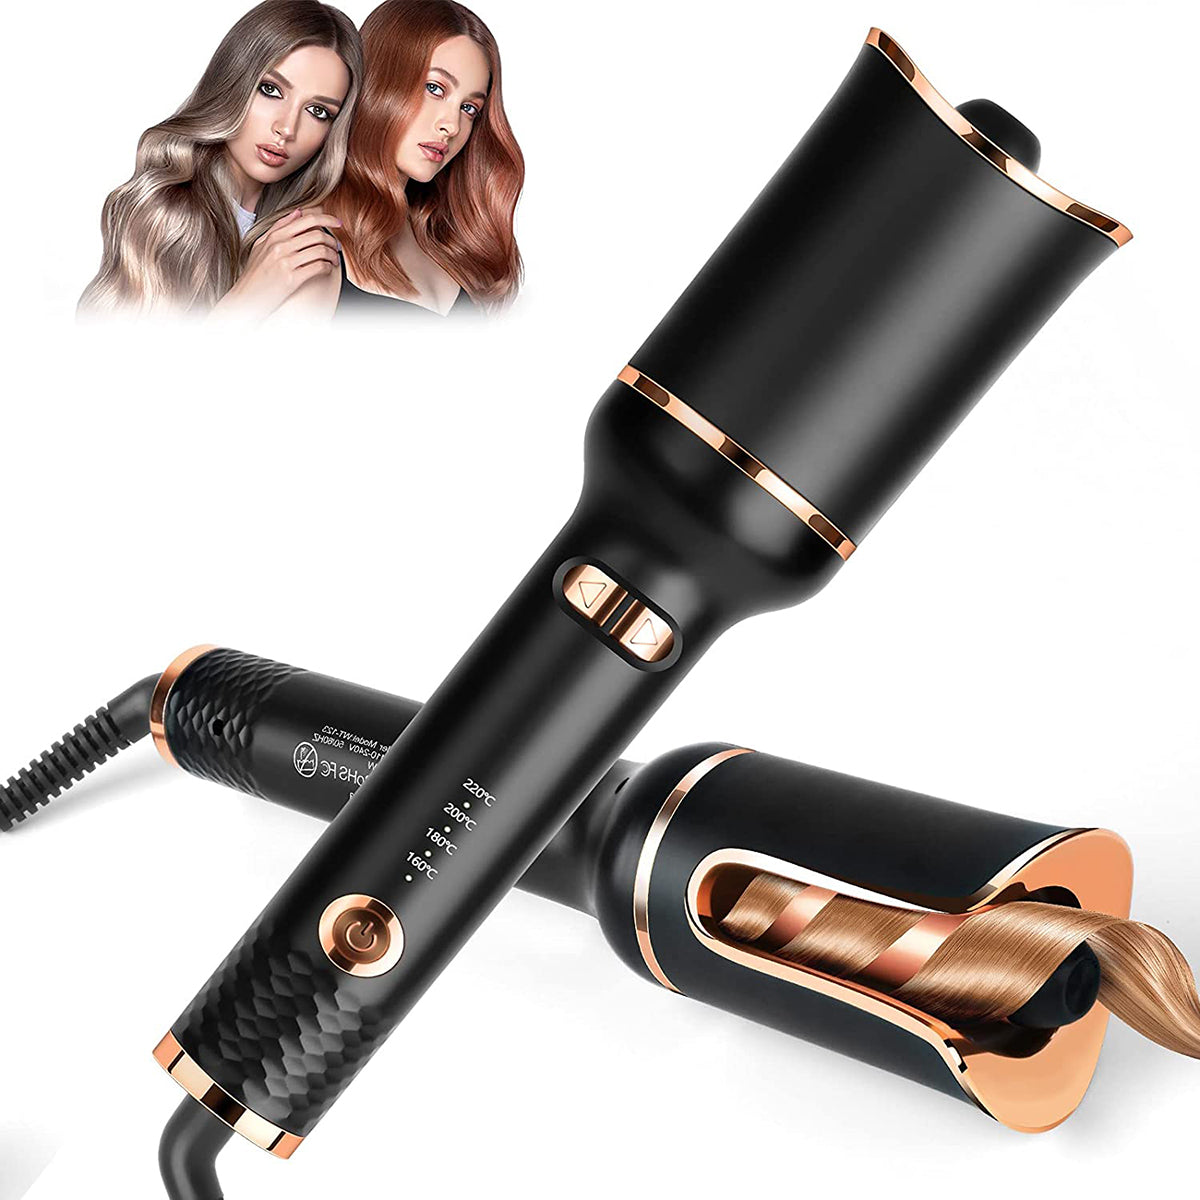 Automatic Curling Iron Air Curling Flat Iron Magic Wand Wave Styling Automatic Rotating Curling Wand Salon Styling